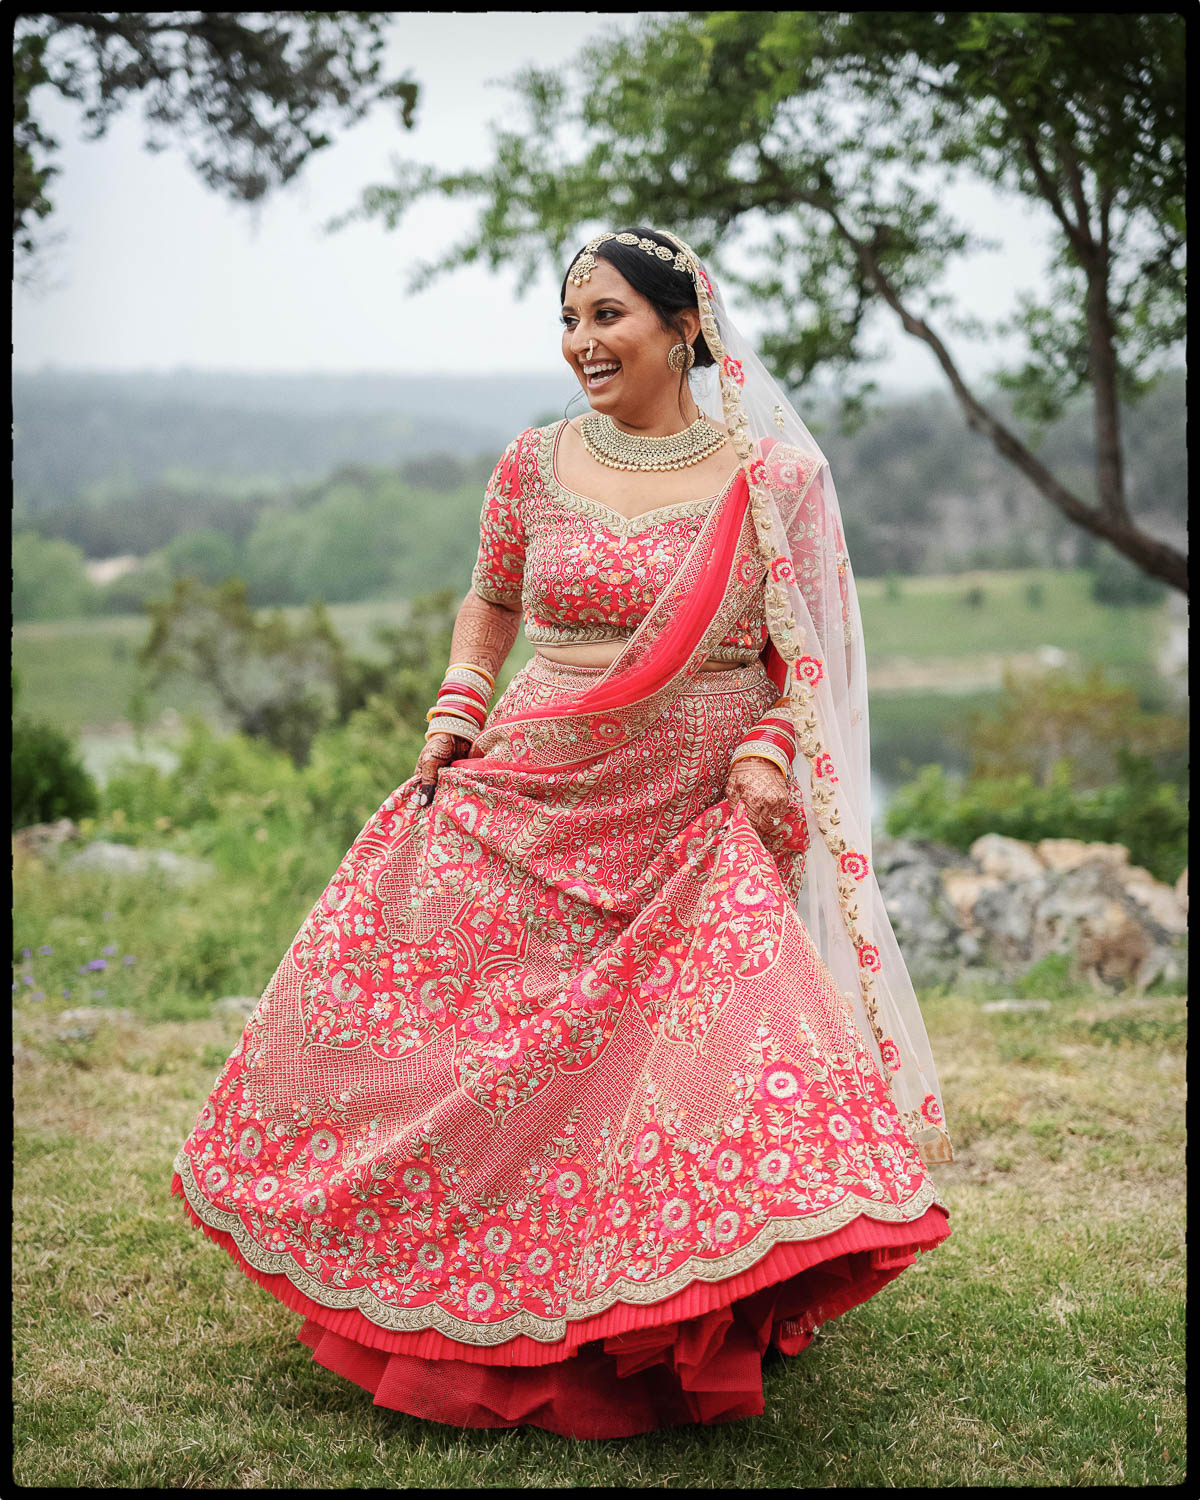 038 The Videre Estate South Asian Wedding in Wimberley Texas Philip Thomas wedding photographer L1007534 Edit